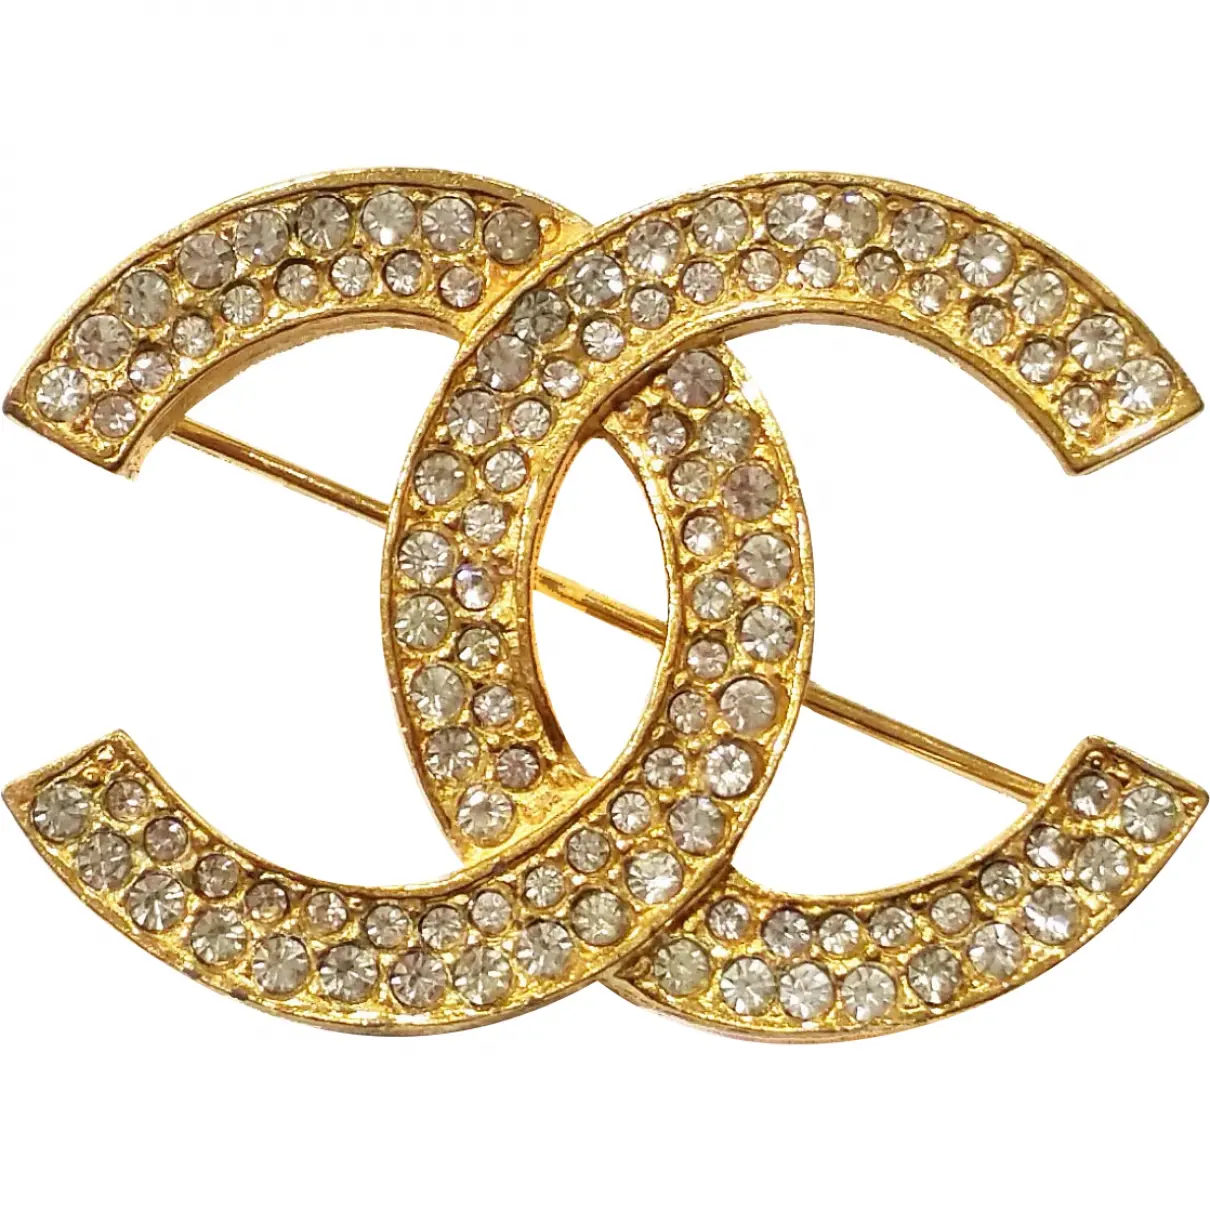 Gold Metal Pin & brooche Chanel - Vintage